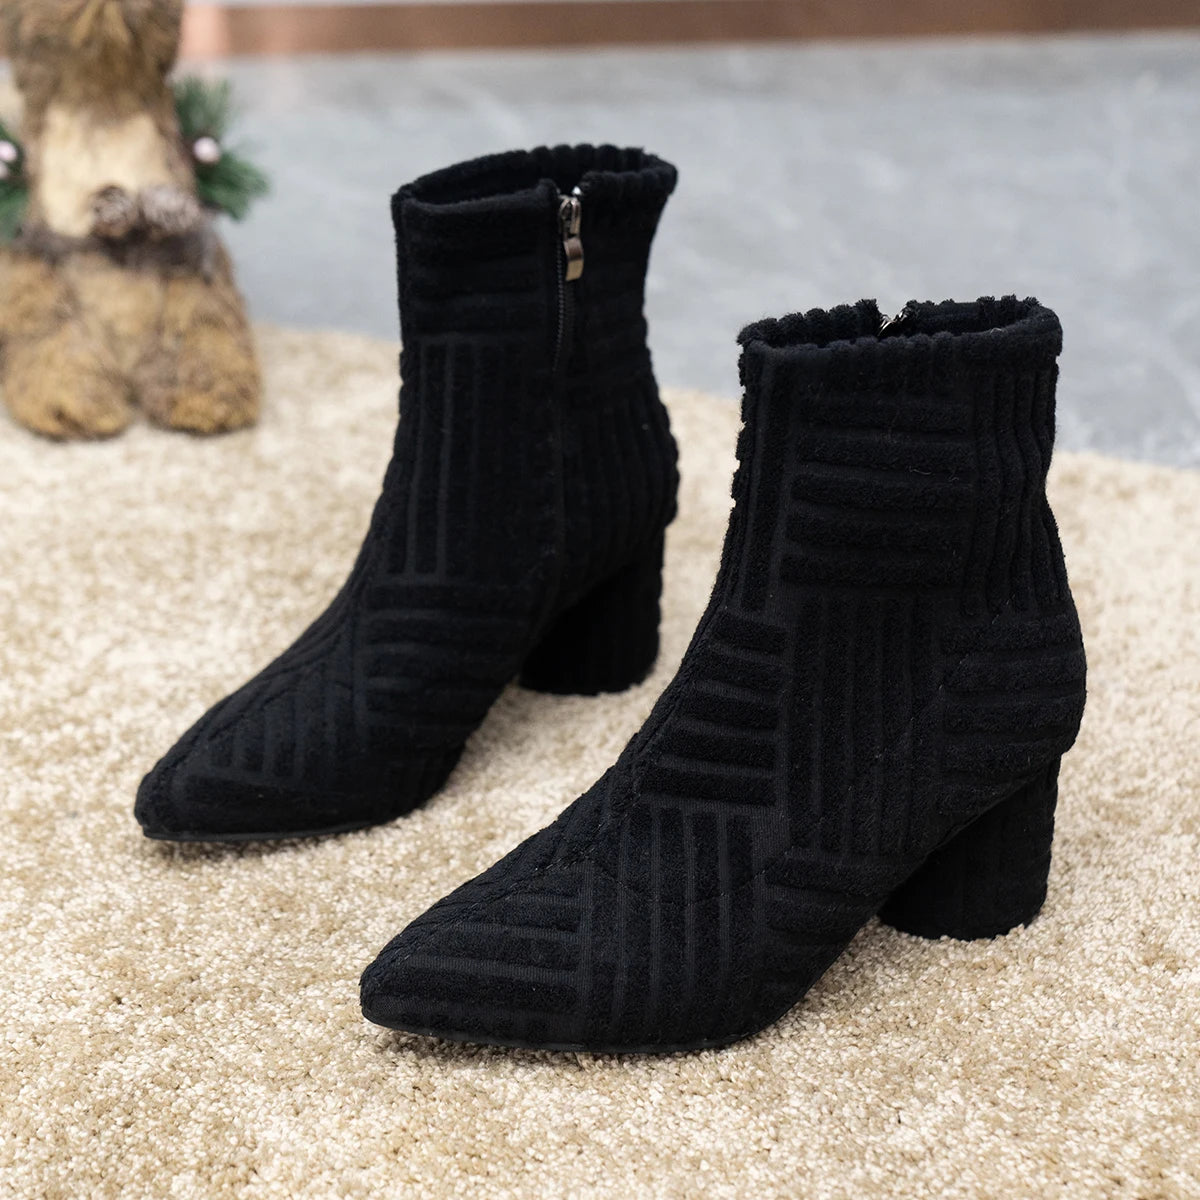 Women's Ankle Boots Green Pointed Roman Boots Denim Square Heel Side Zipper Sexy-Dollar Bargains Online Shopping Australia